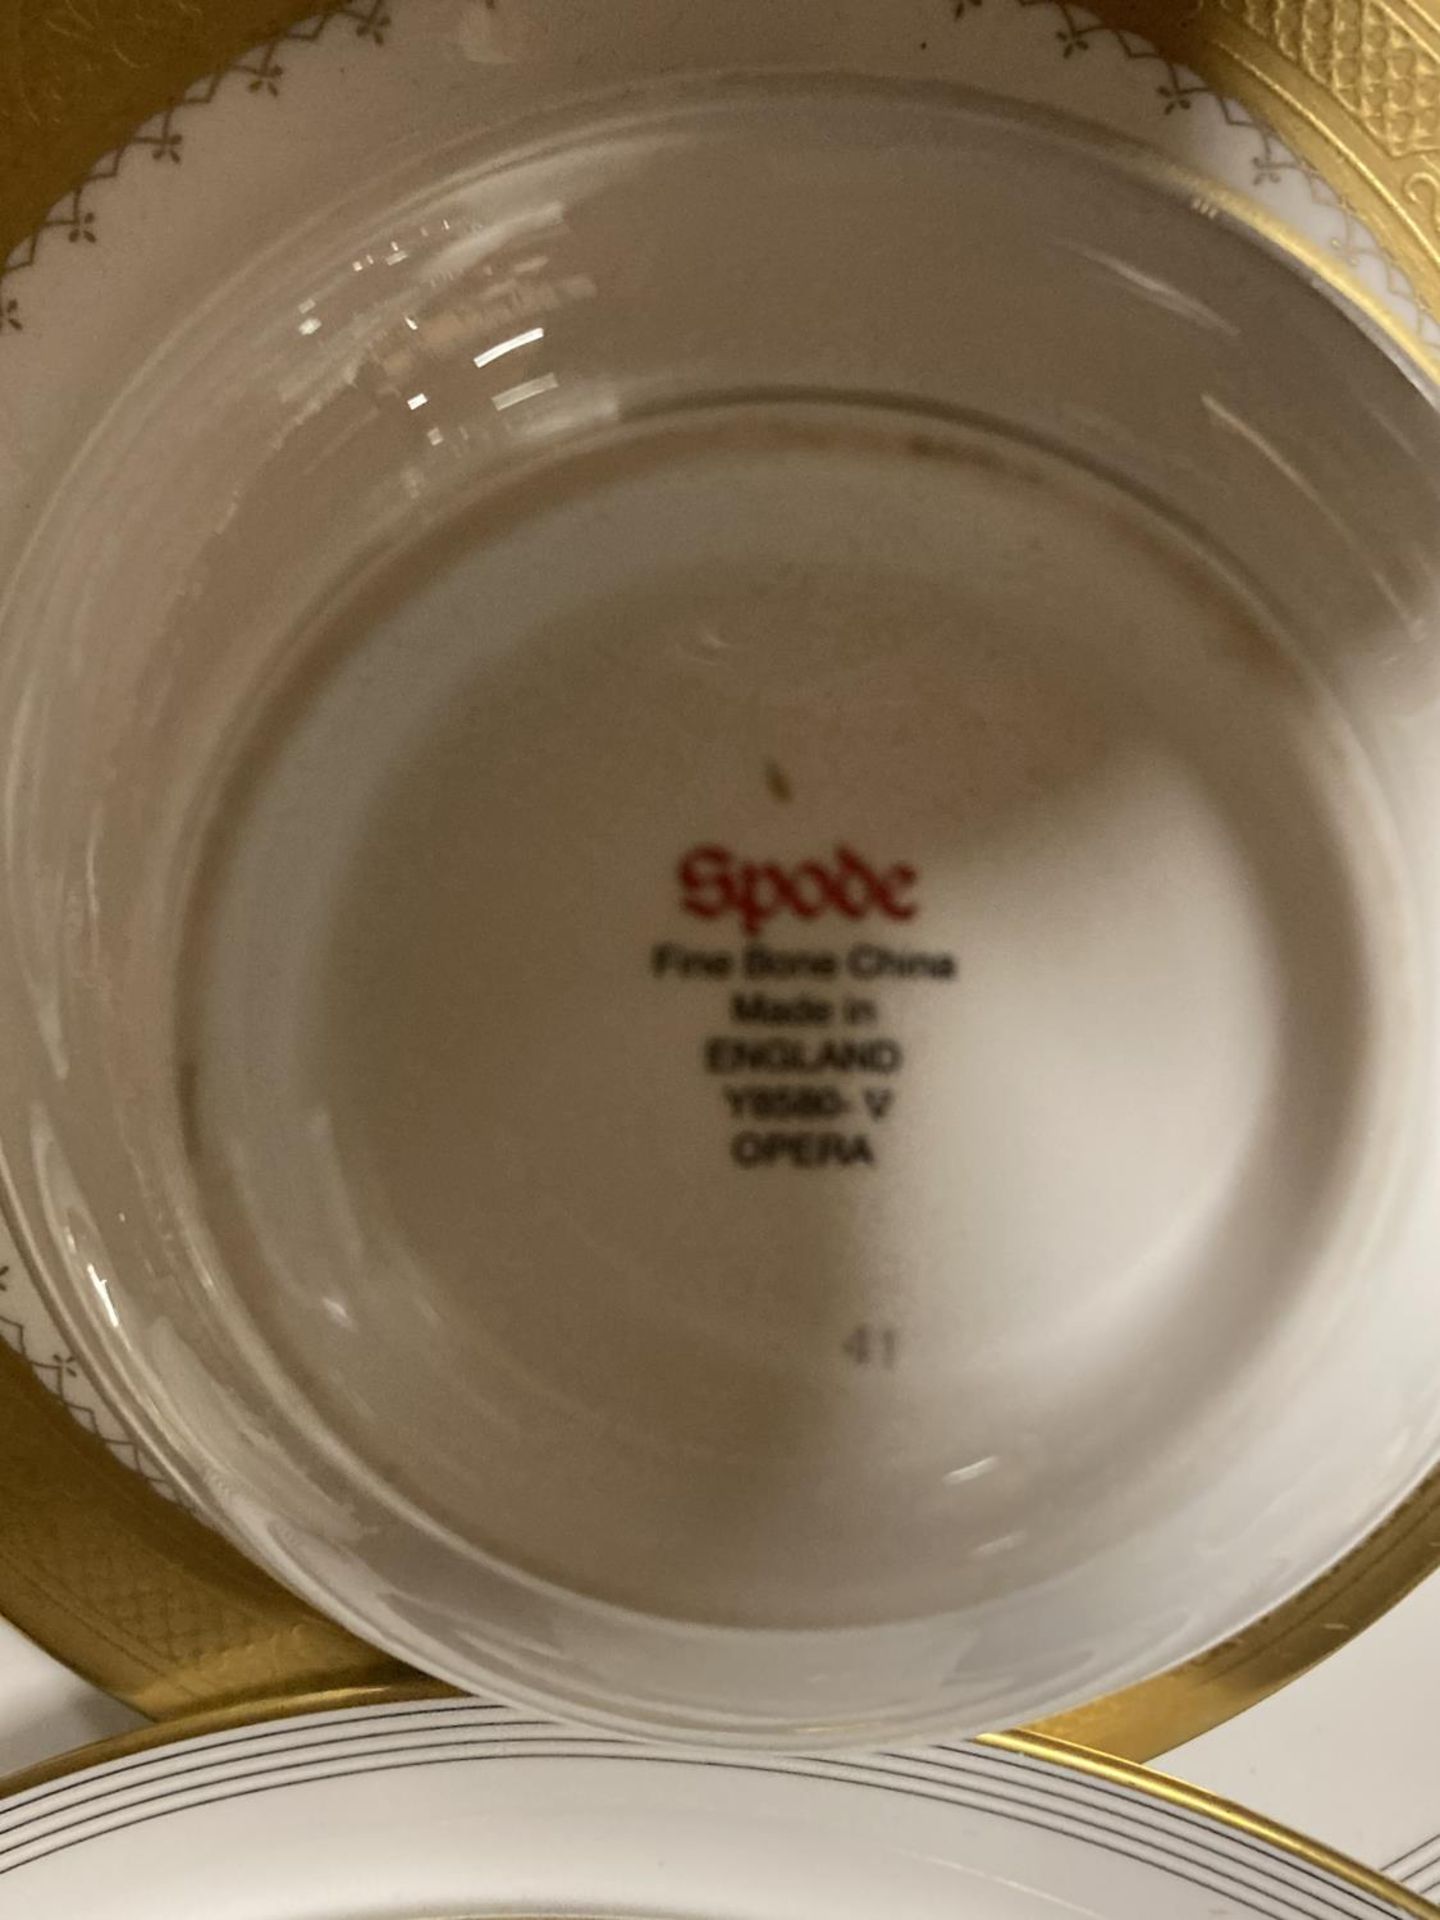 A QUANTITY OF SPODE 'OPERA' SOUP BOWLS AND PLATES - Image 3 of 3